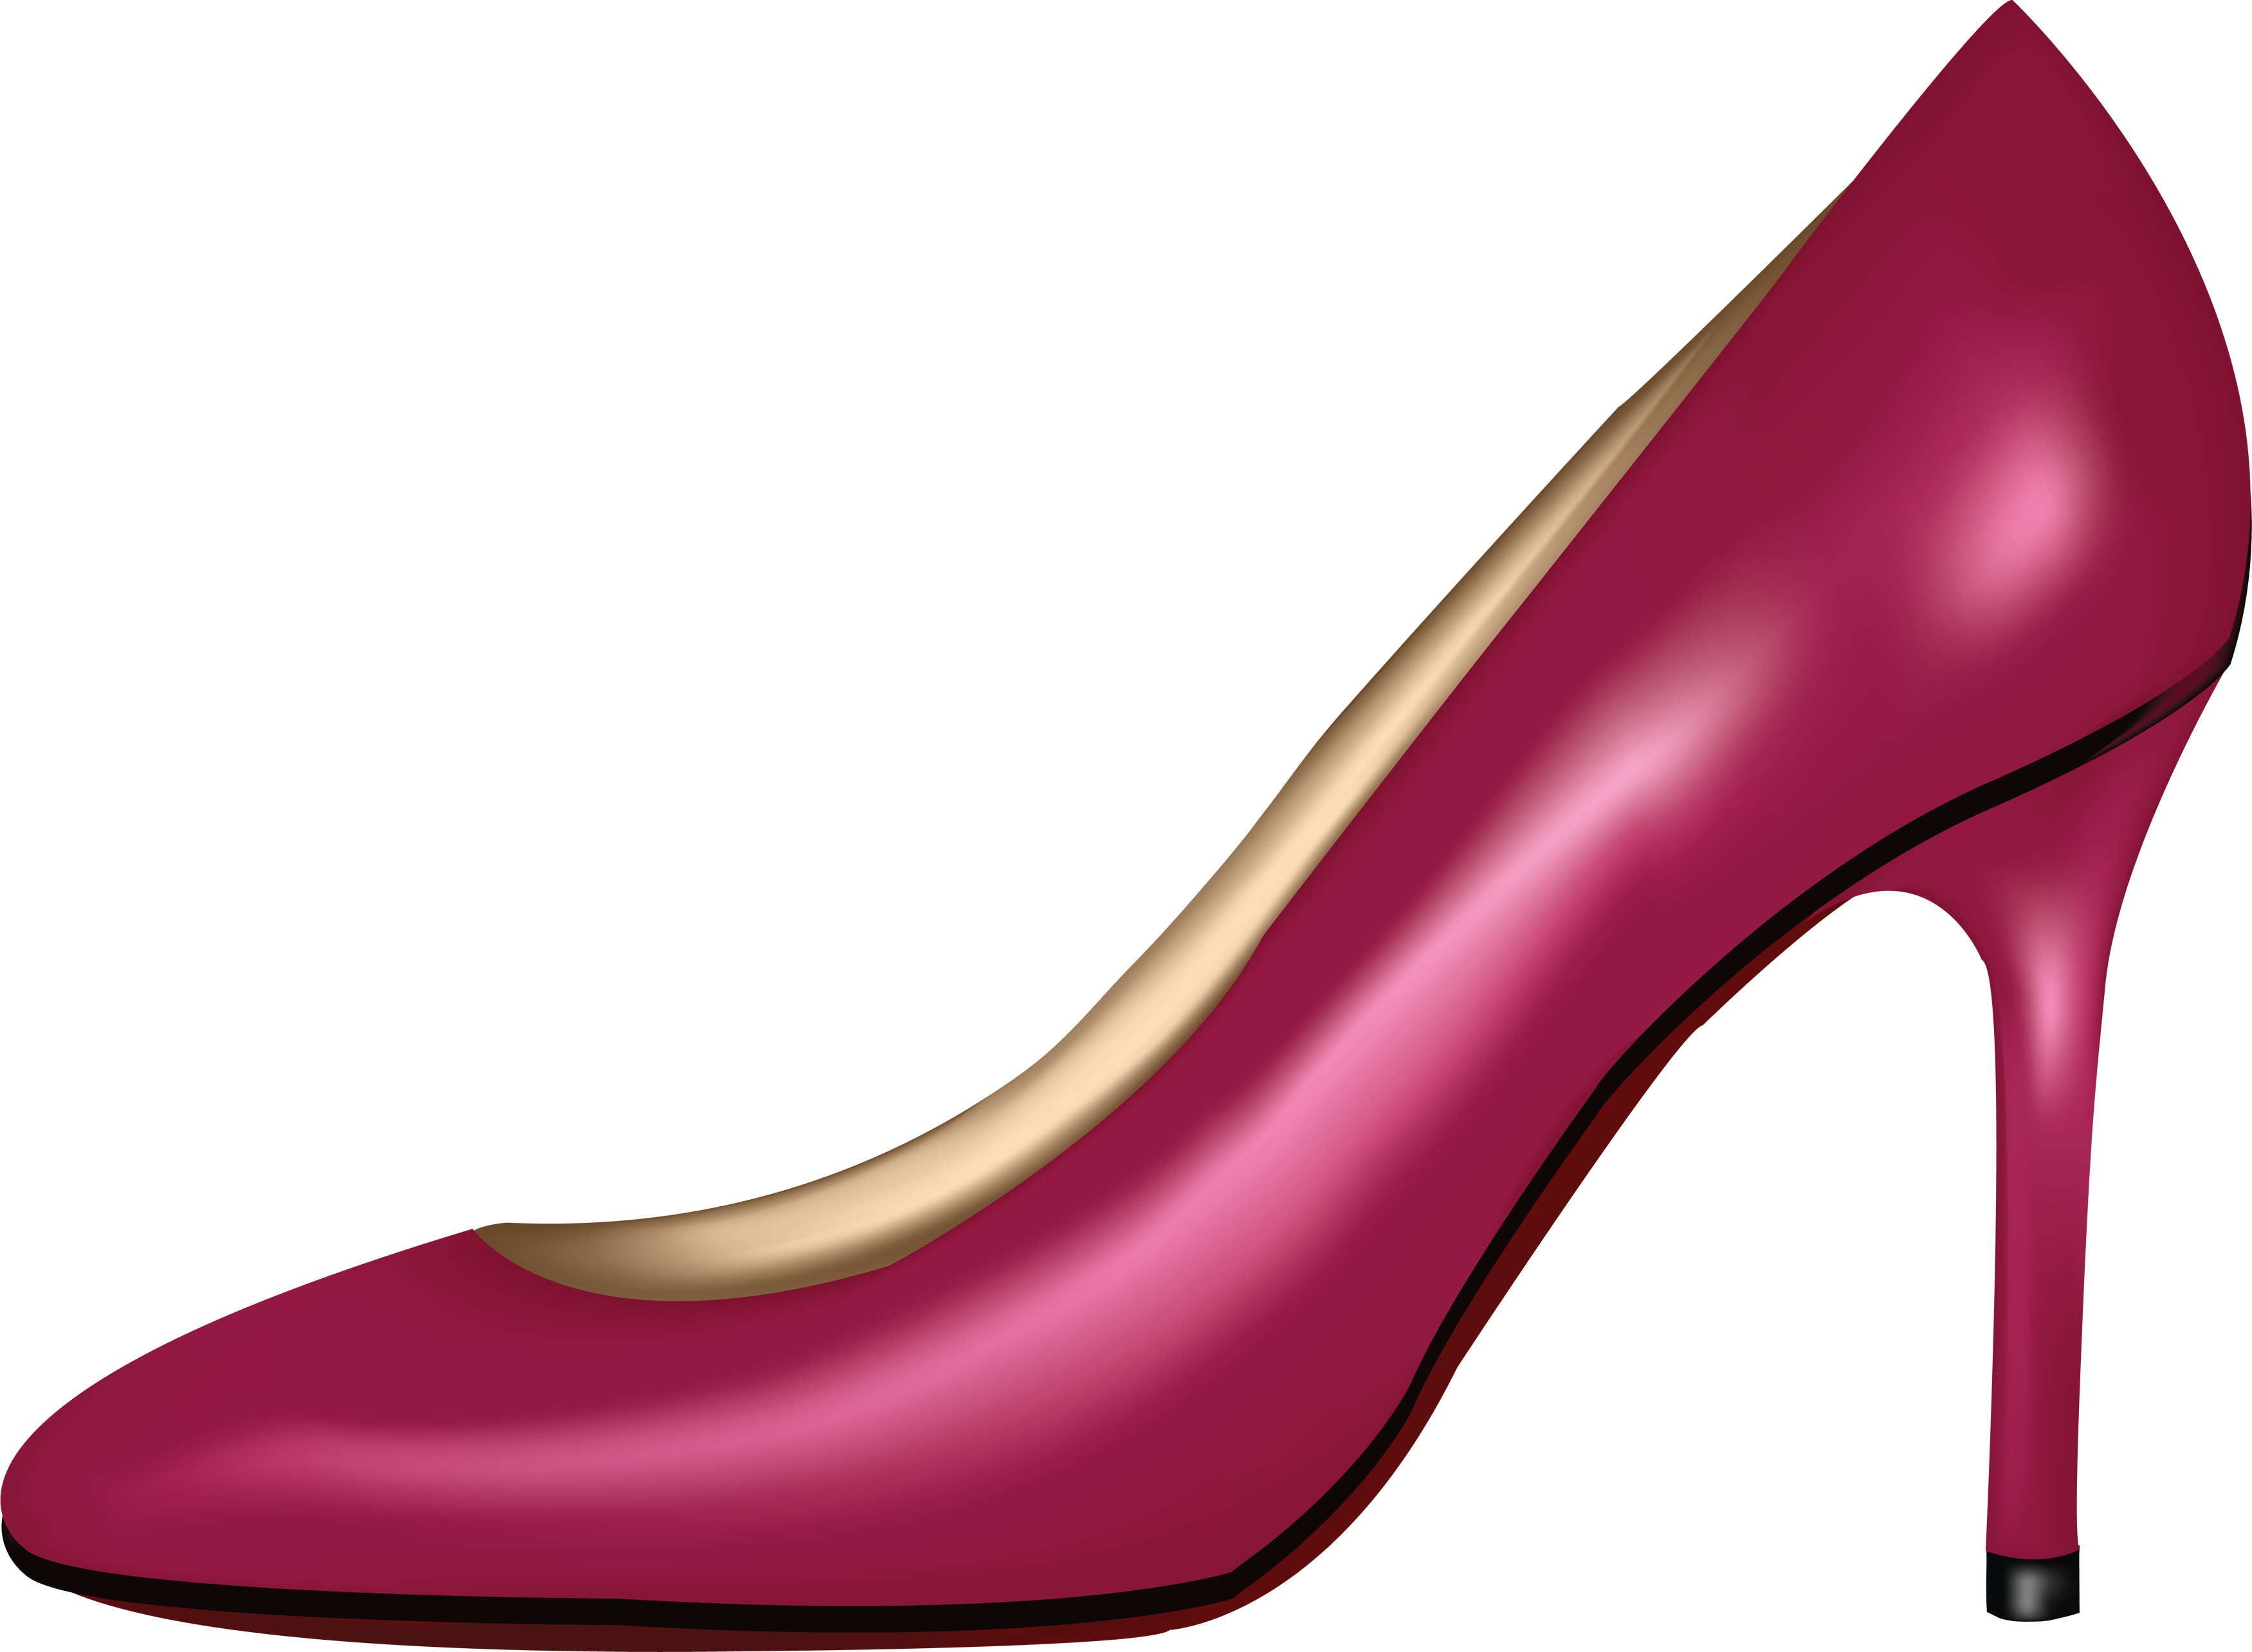 women_shoes_PNG7470.png 